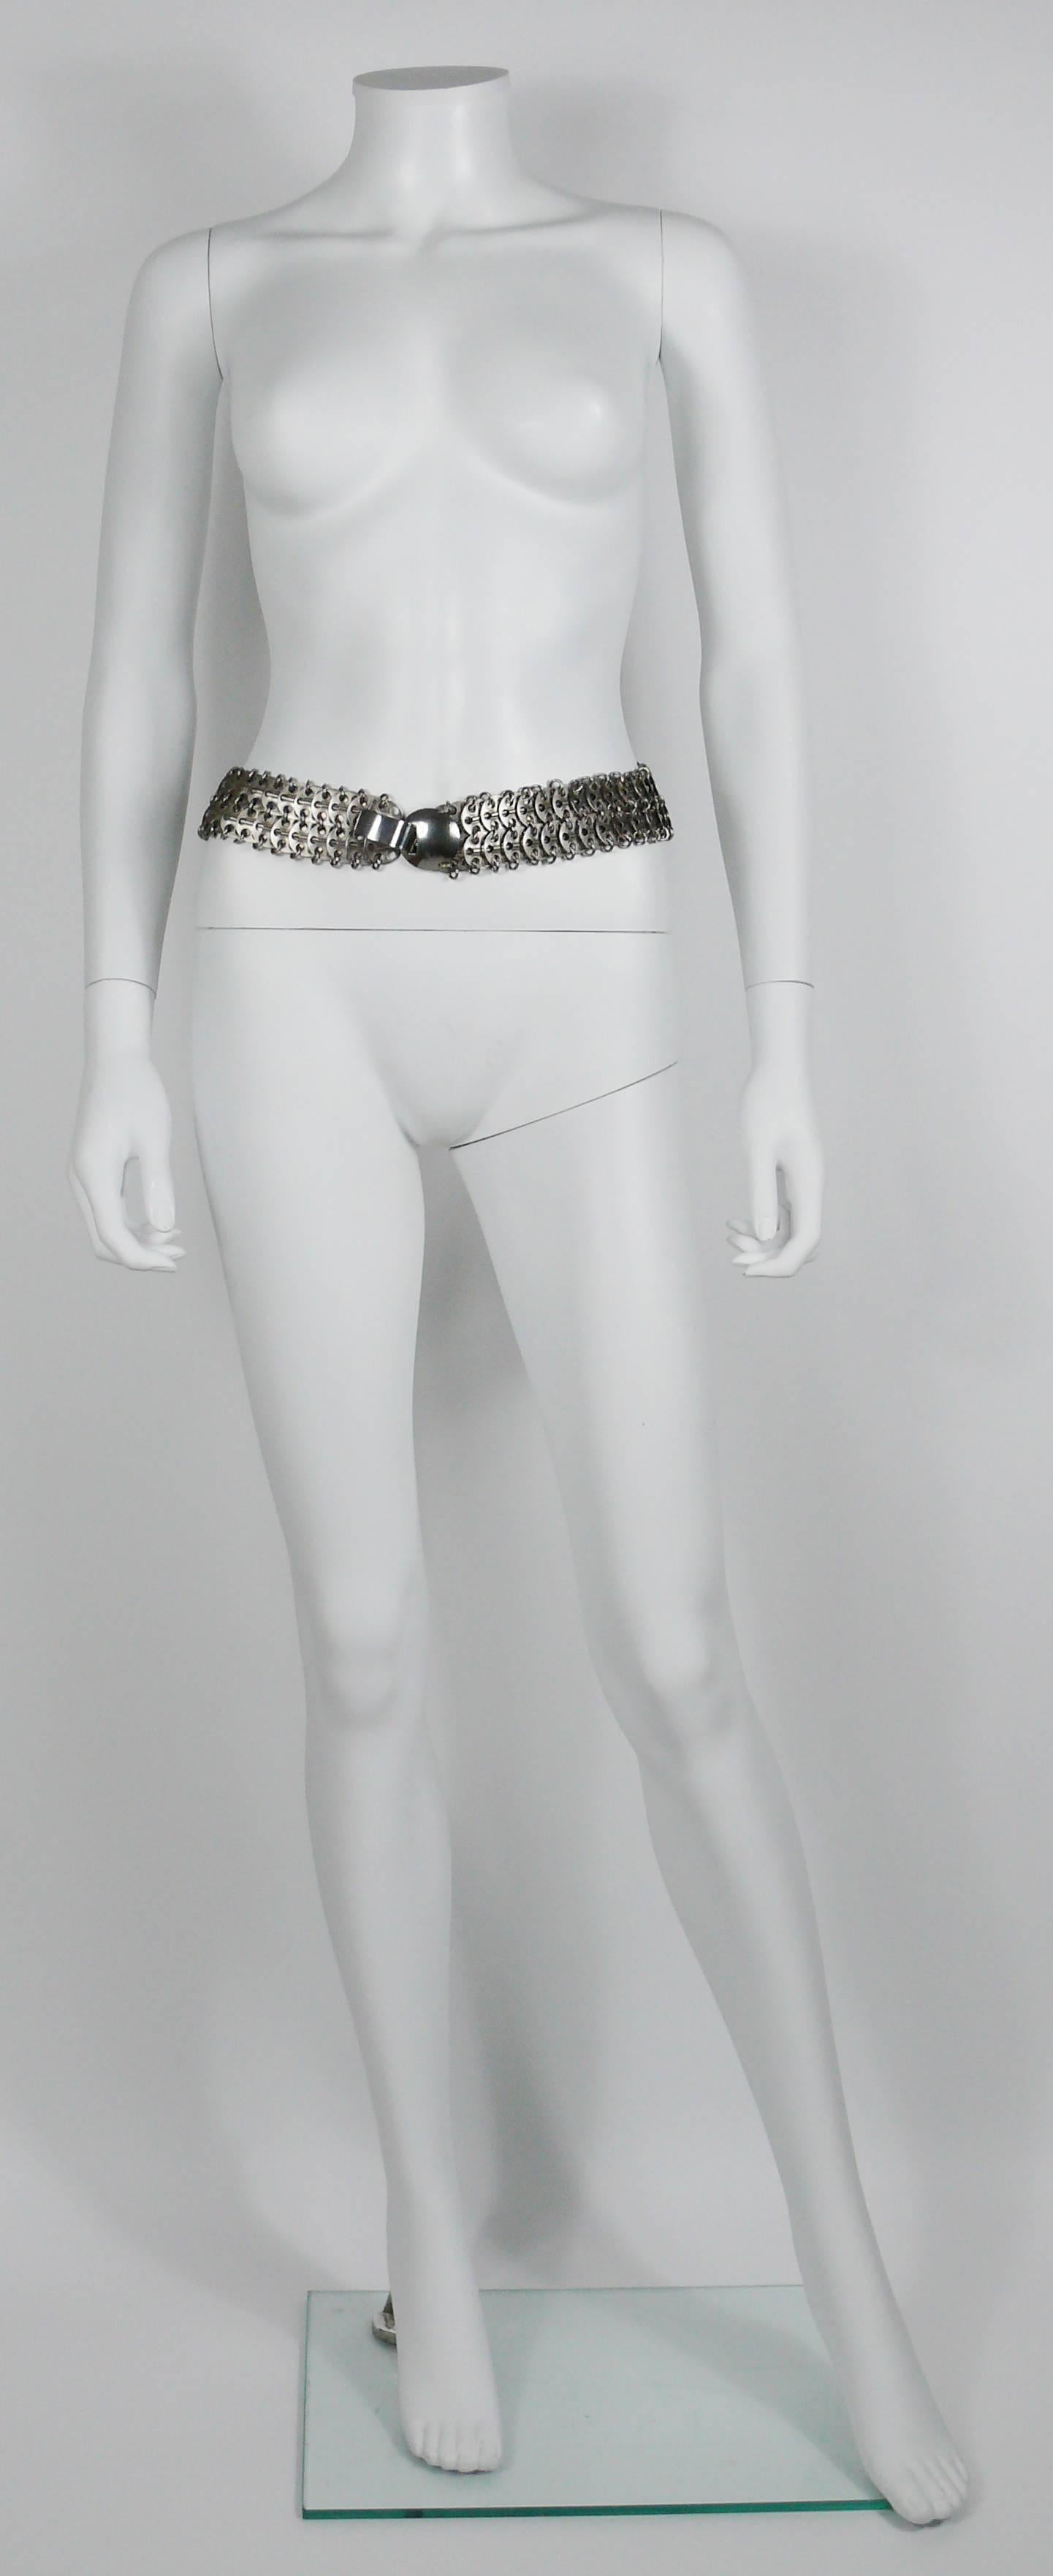 PACO RABANNE vintage Space Age silver tone belt featuring perforated metal discs and a convex round buckle.

Original PACO RABANNE Paris Made in France sticker on the reverse of the buckle.

Indicative measurements : length approx. 76.5 cm